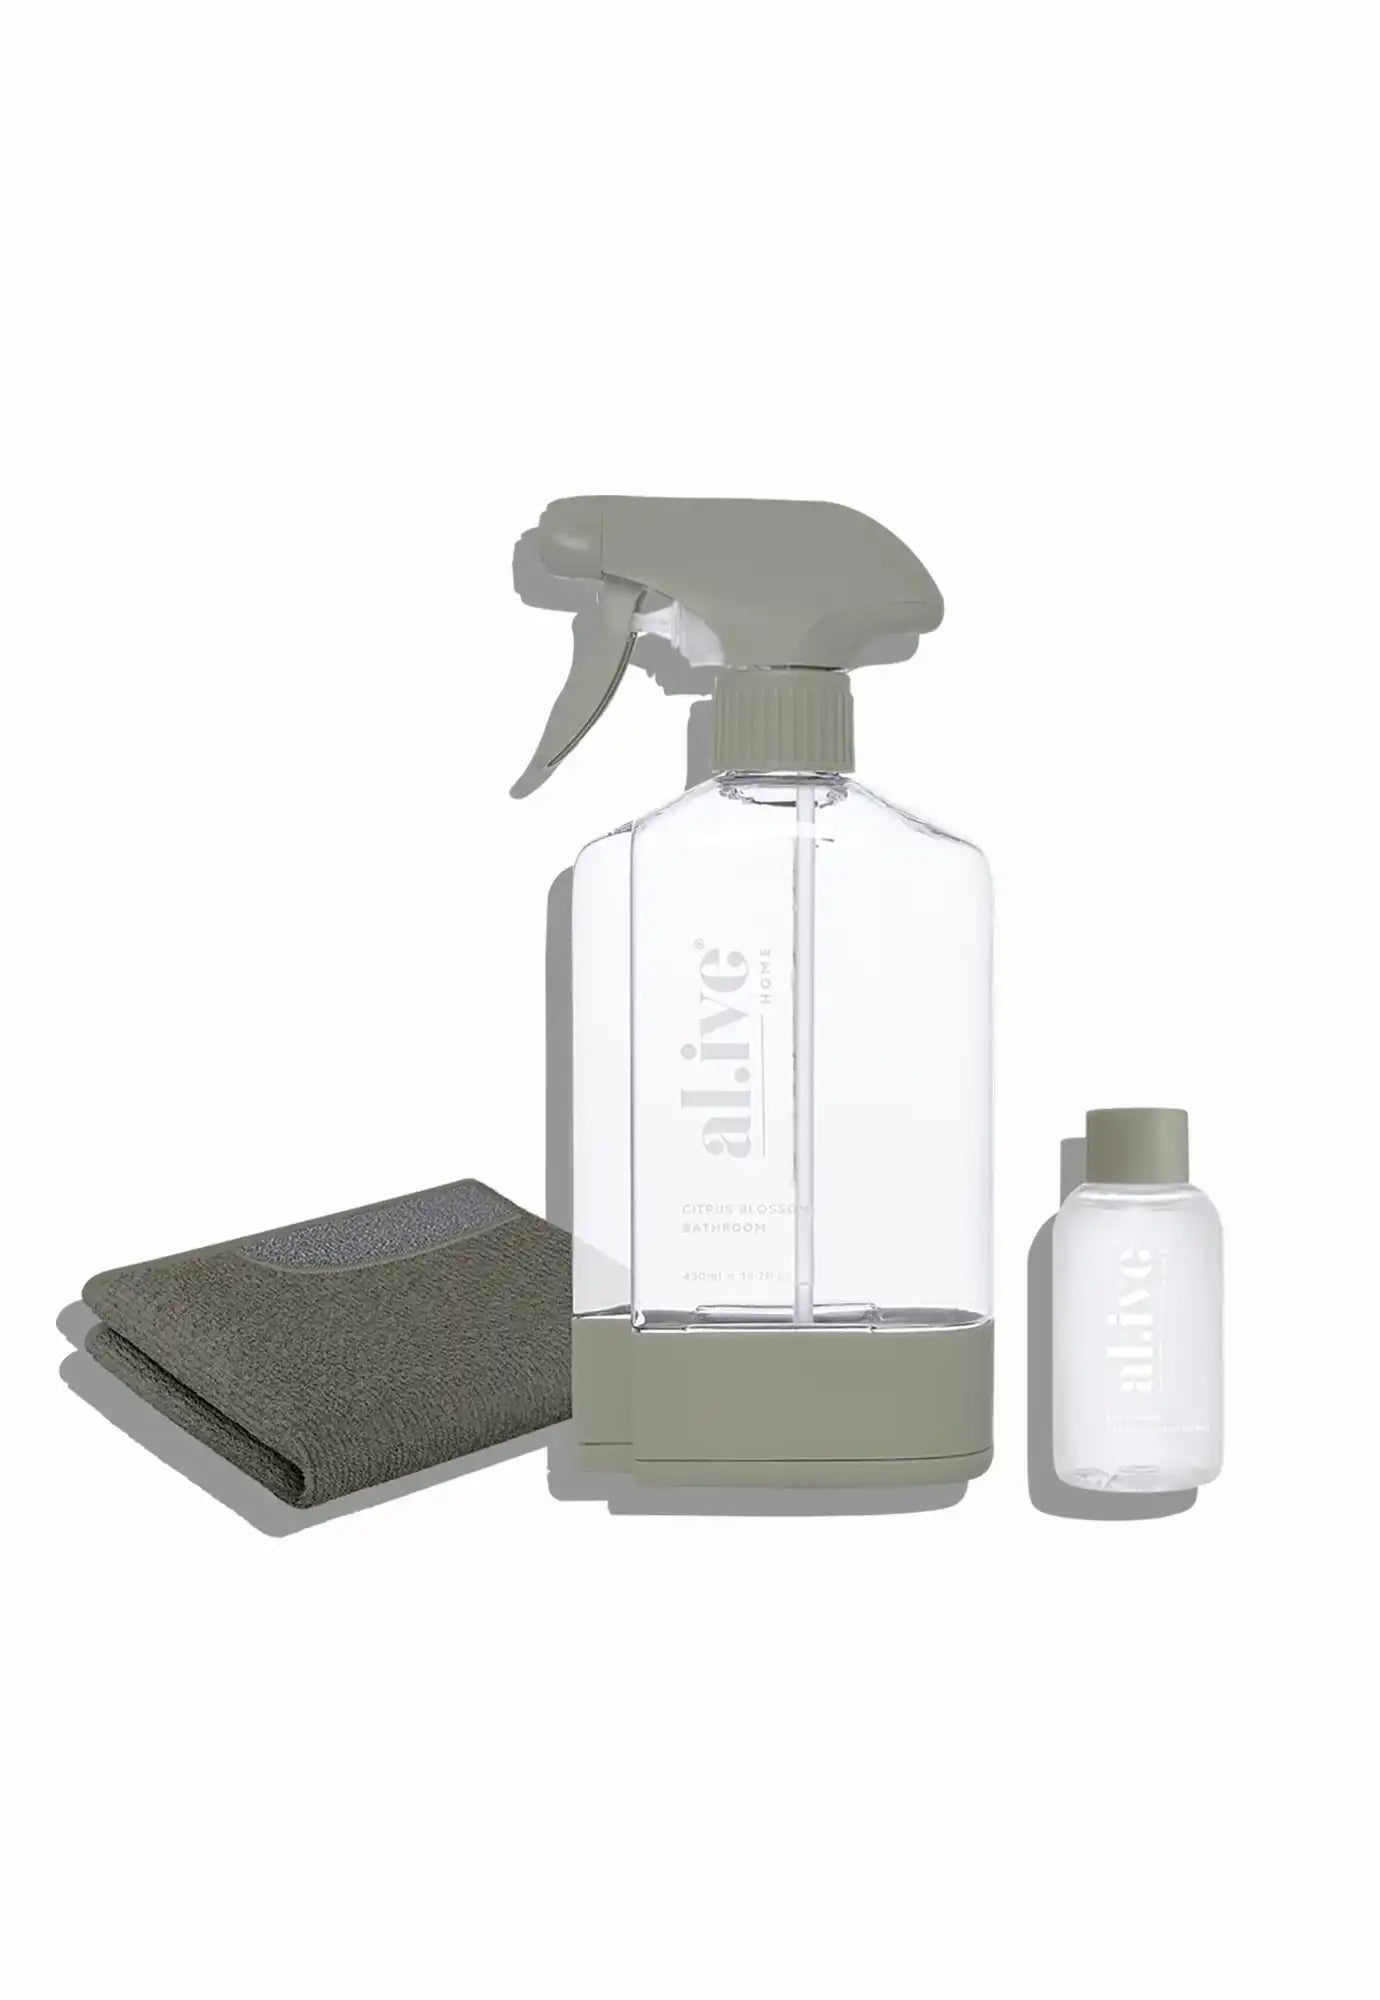 al.ive - home cleaning kits